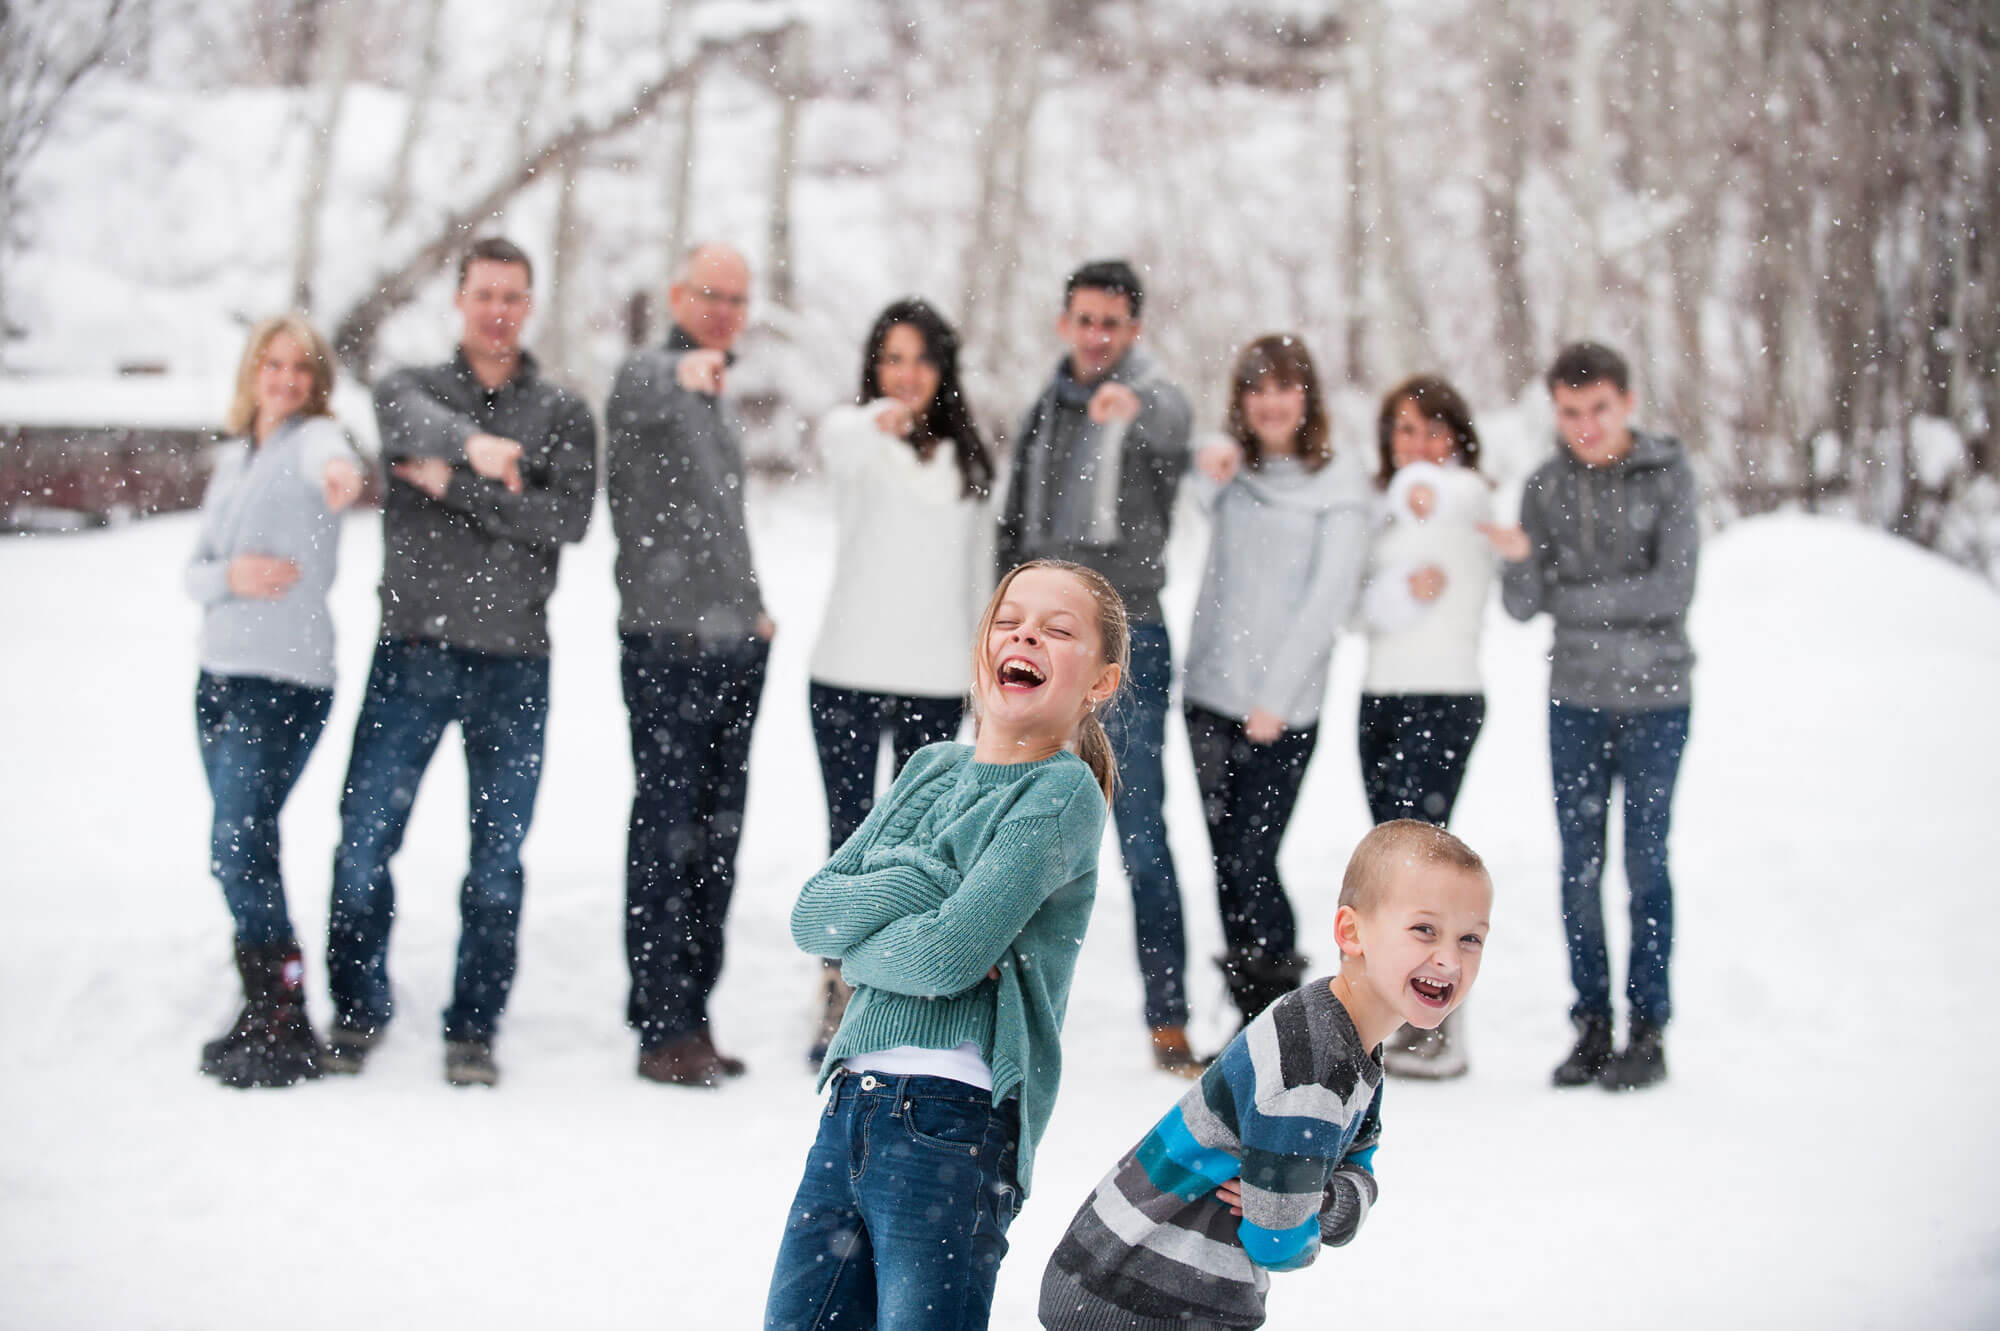 Family photo taken in a snow storm